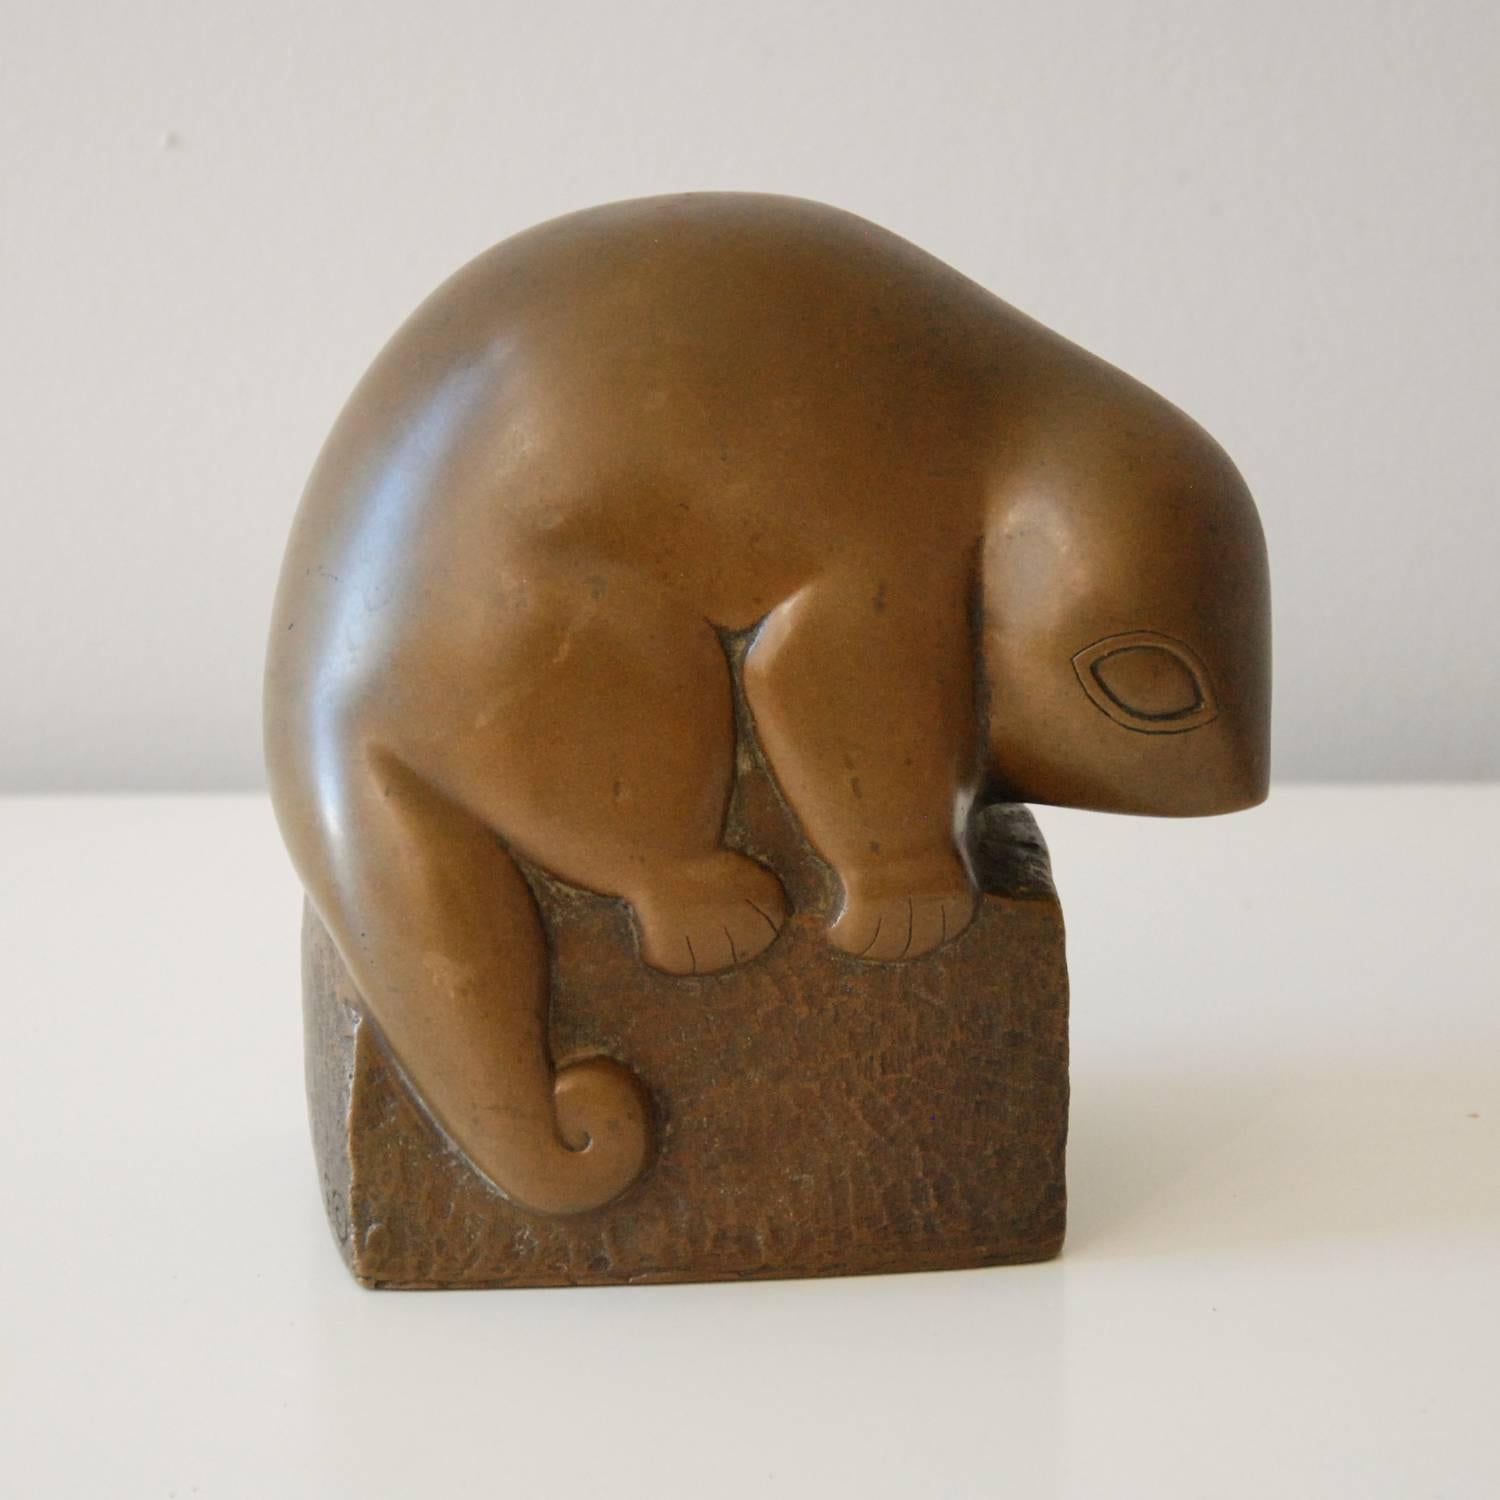 A very stylized copper over plaster sculpture of a lemur by noted sculptor Marian Weisberg. The work is signed on the side of the base. Original patina.